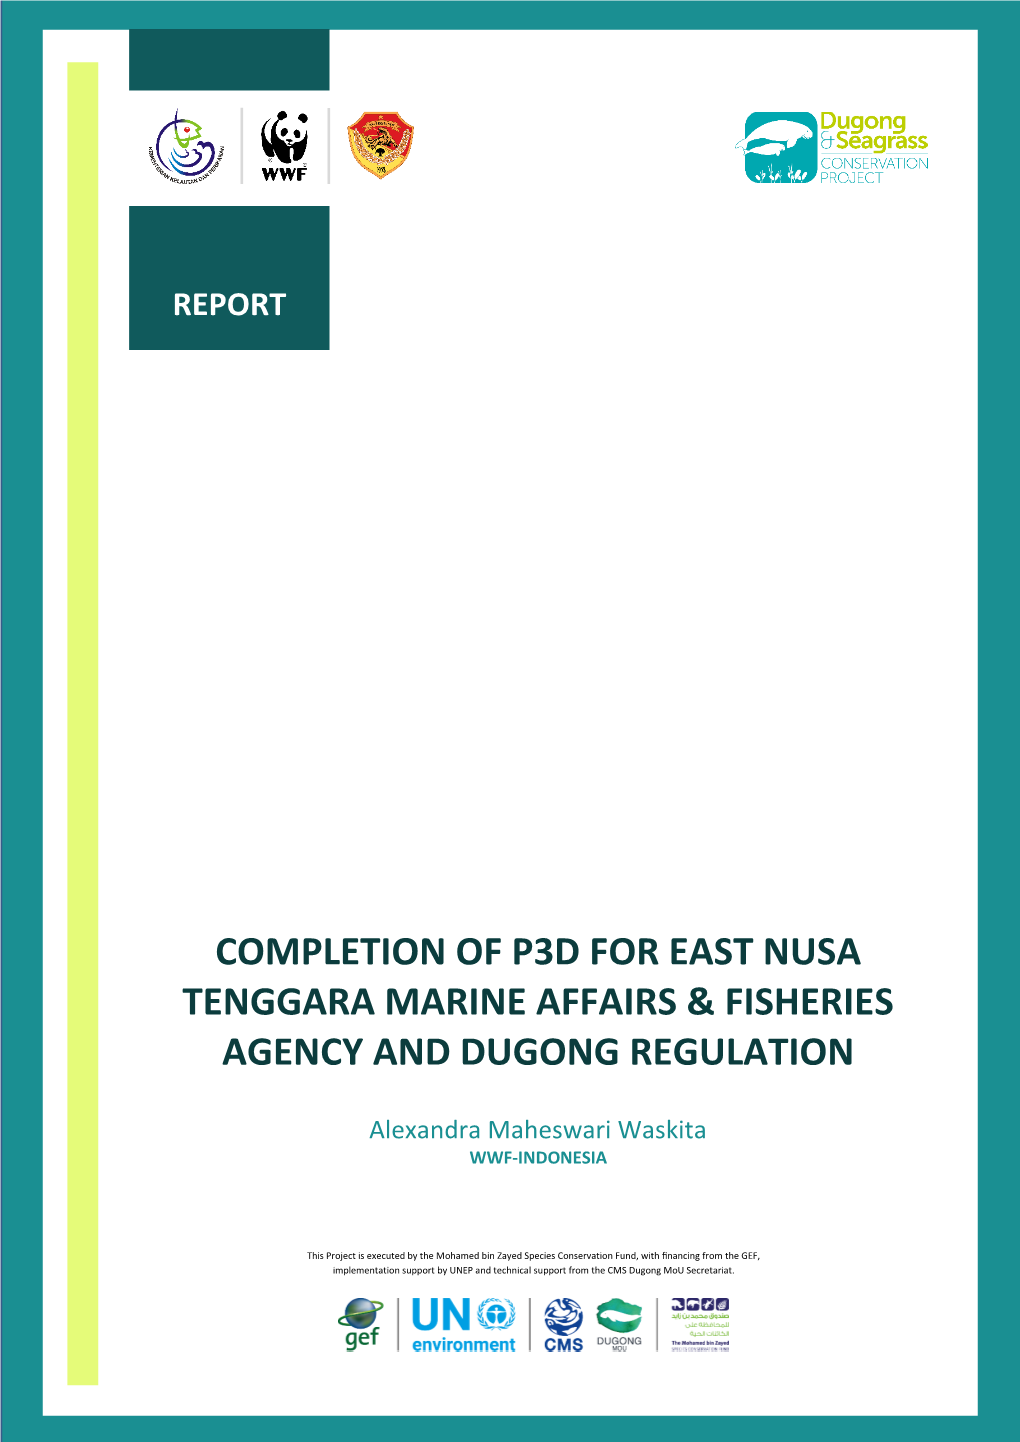 Completion of P3d for East Nusa Tenggara Marine Affairs & Fisheries